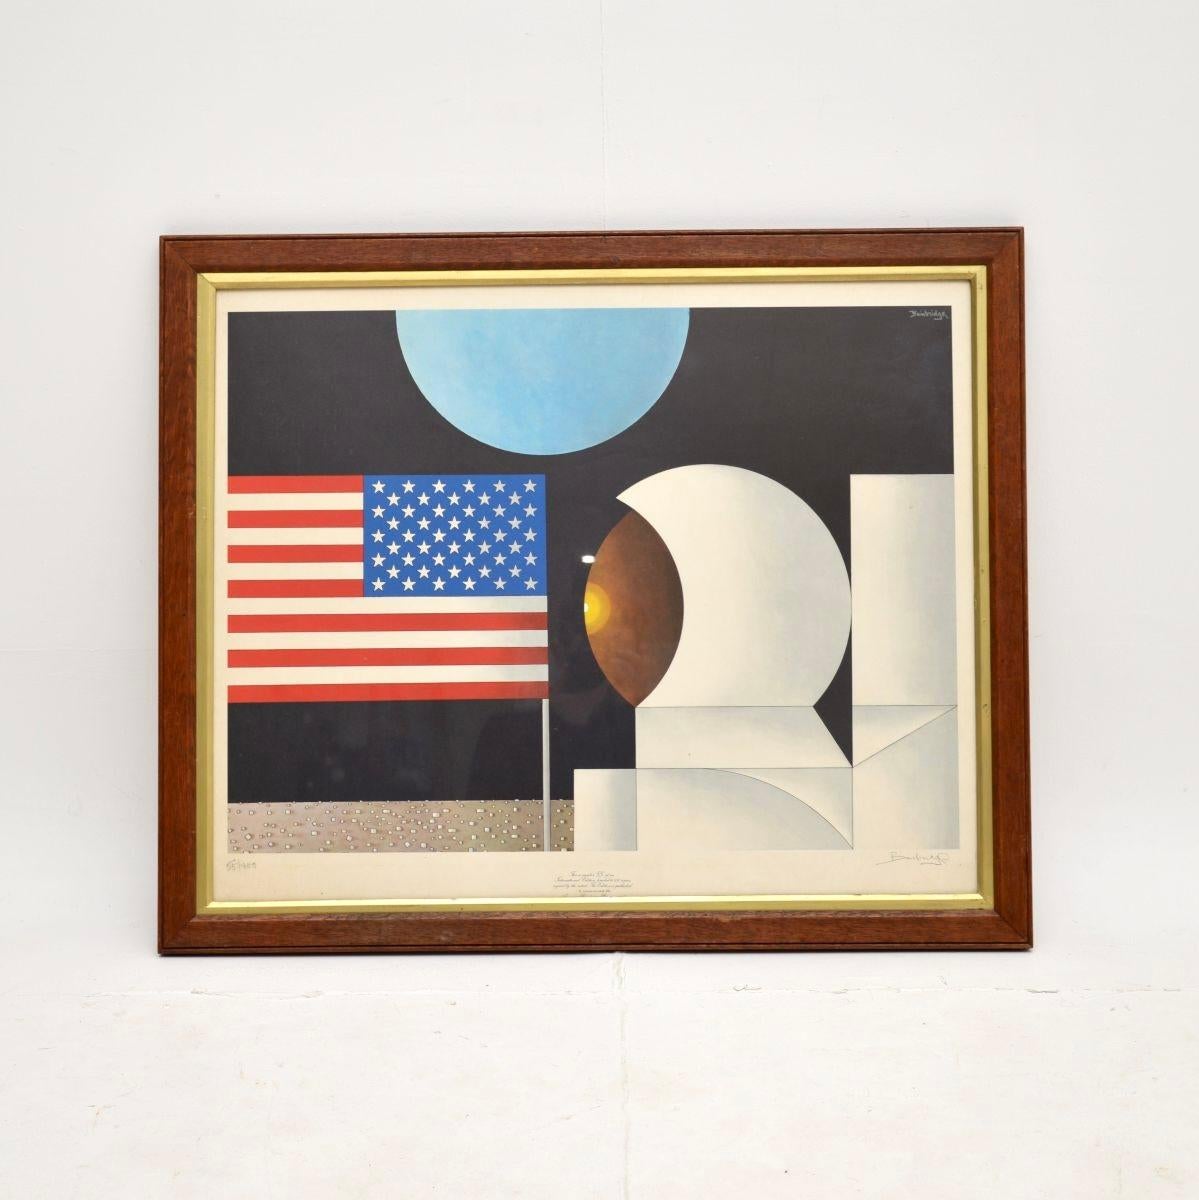 A fantastic vintage signed print from the American revolution bicentennial, dating from 1976.

This is beautifully designed, clearly celebrating the USA’s achievements in space exploration. It is signed by the artist ‘Bainbridge’ and is numbered 55